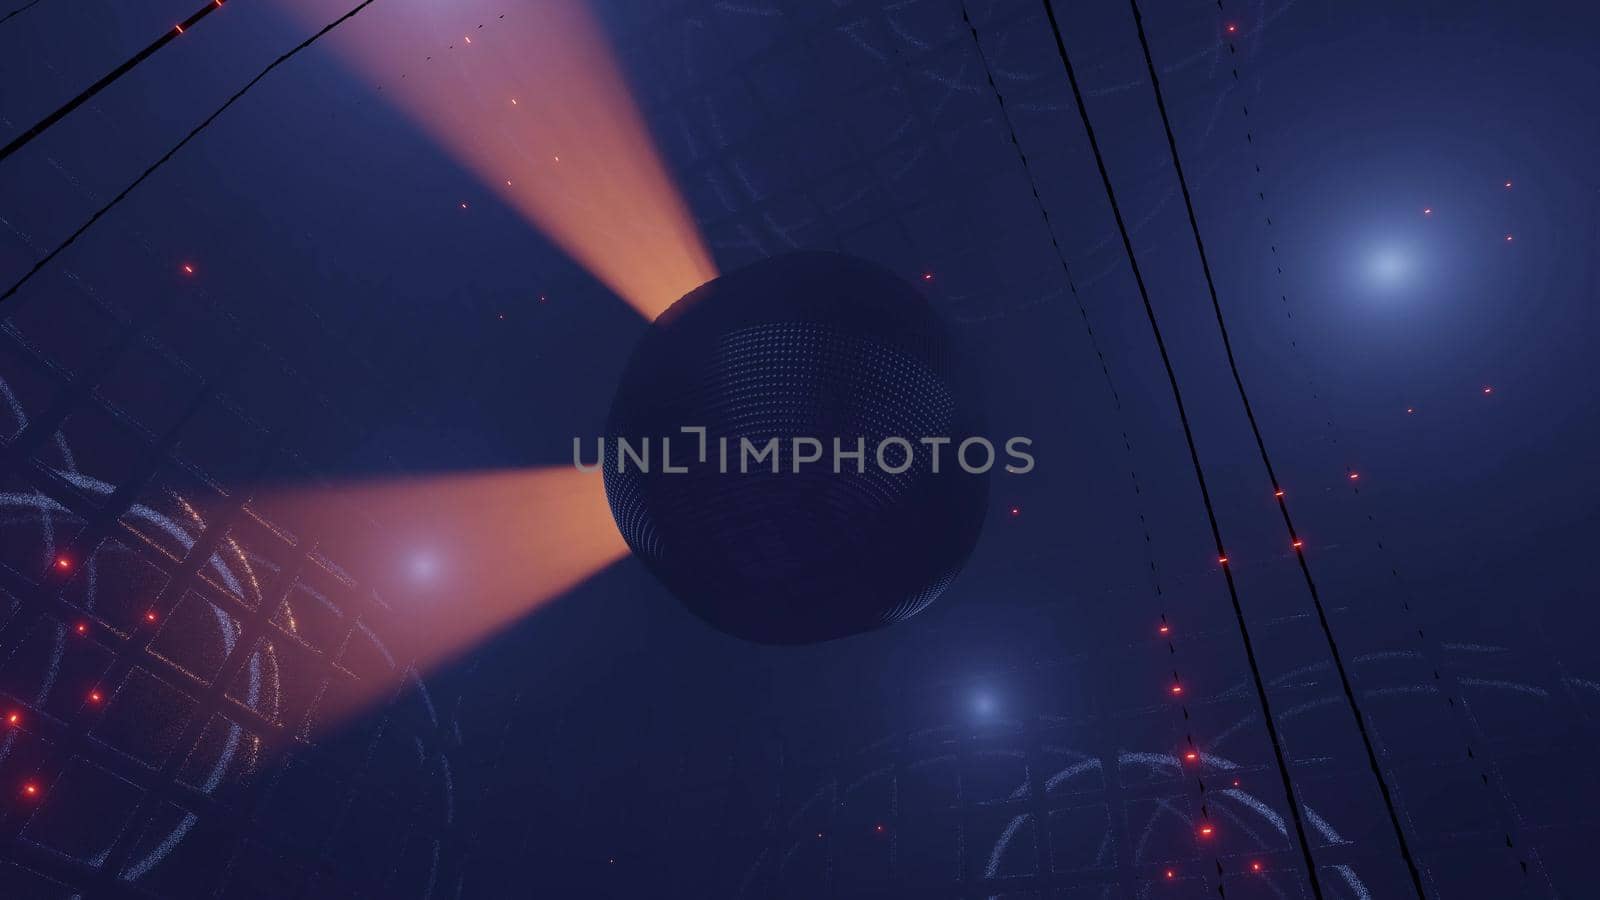 3d illustration of abstract 4K UHD background with sphere with glowing rays of light against grid in darkness